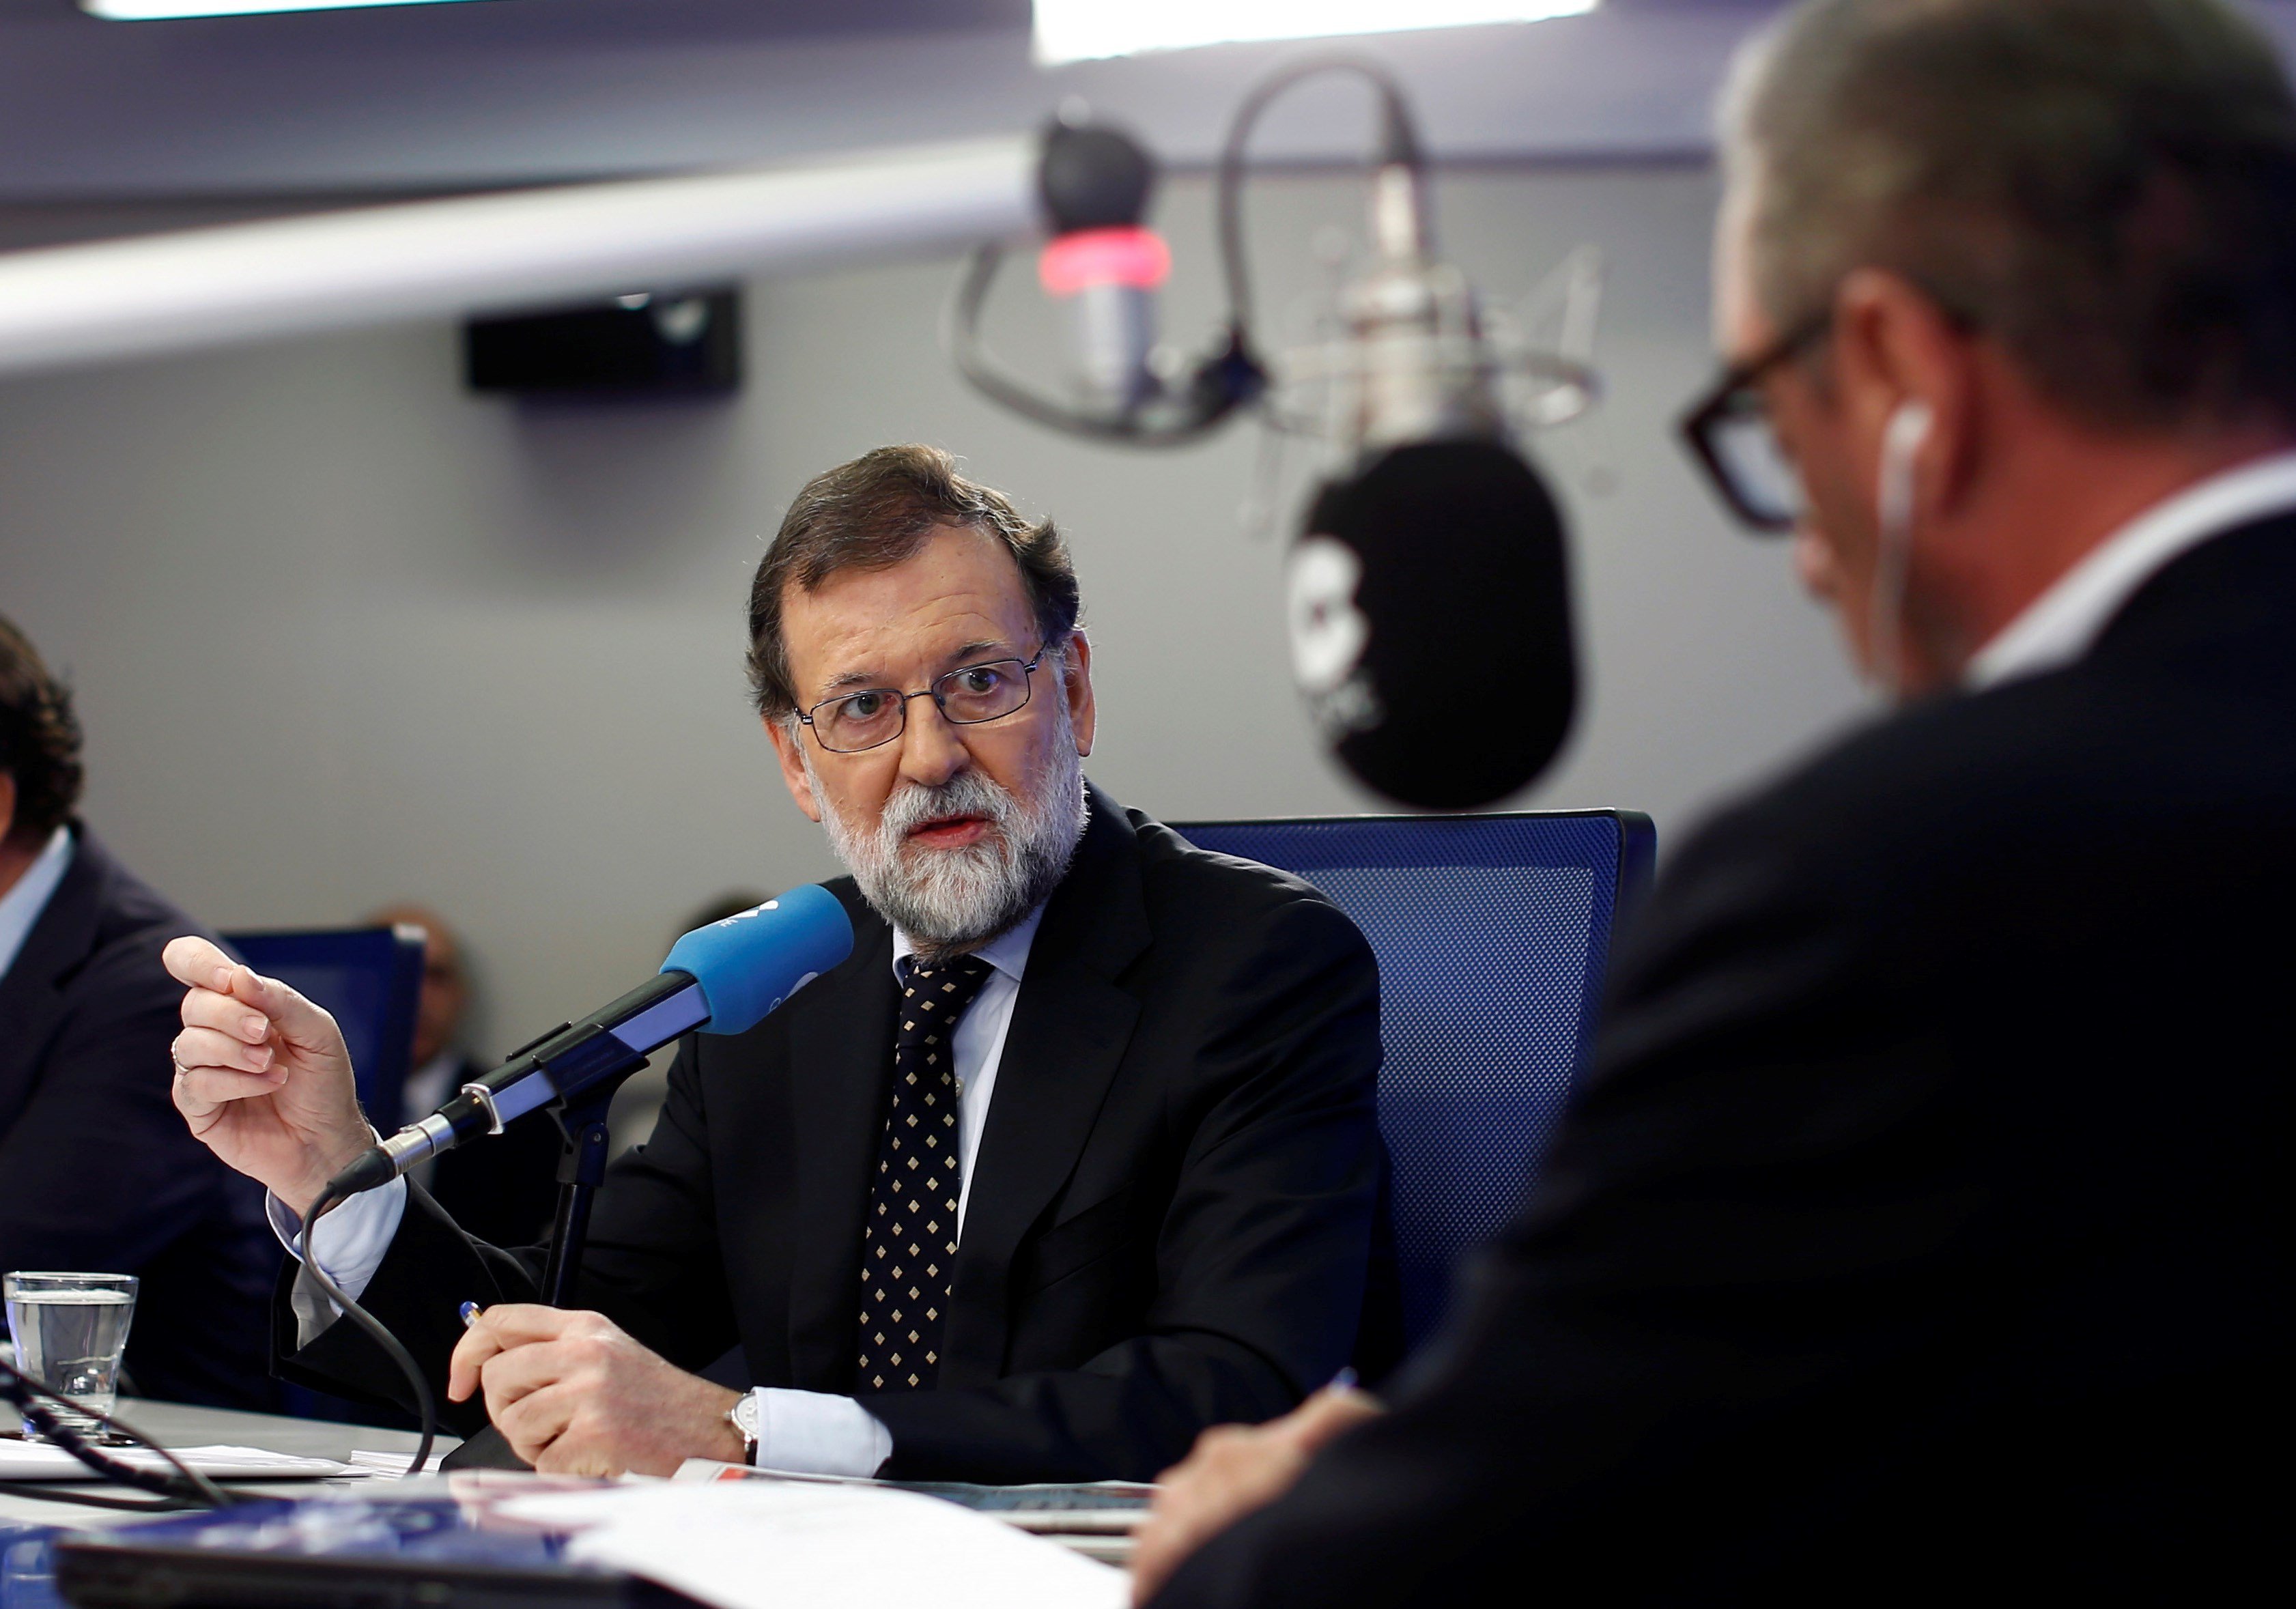 Rajoy: "I've dismissed the Catalan government, that's not been done since WWII"